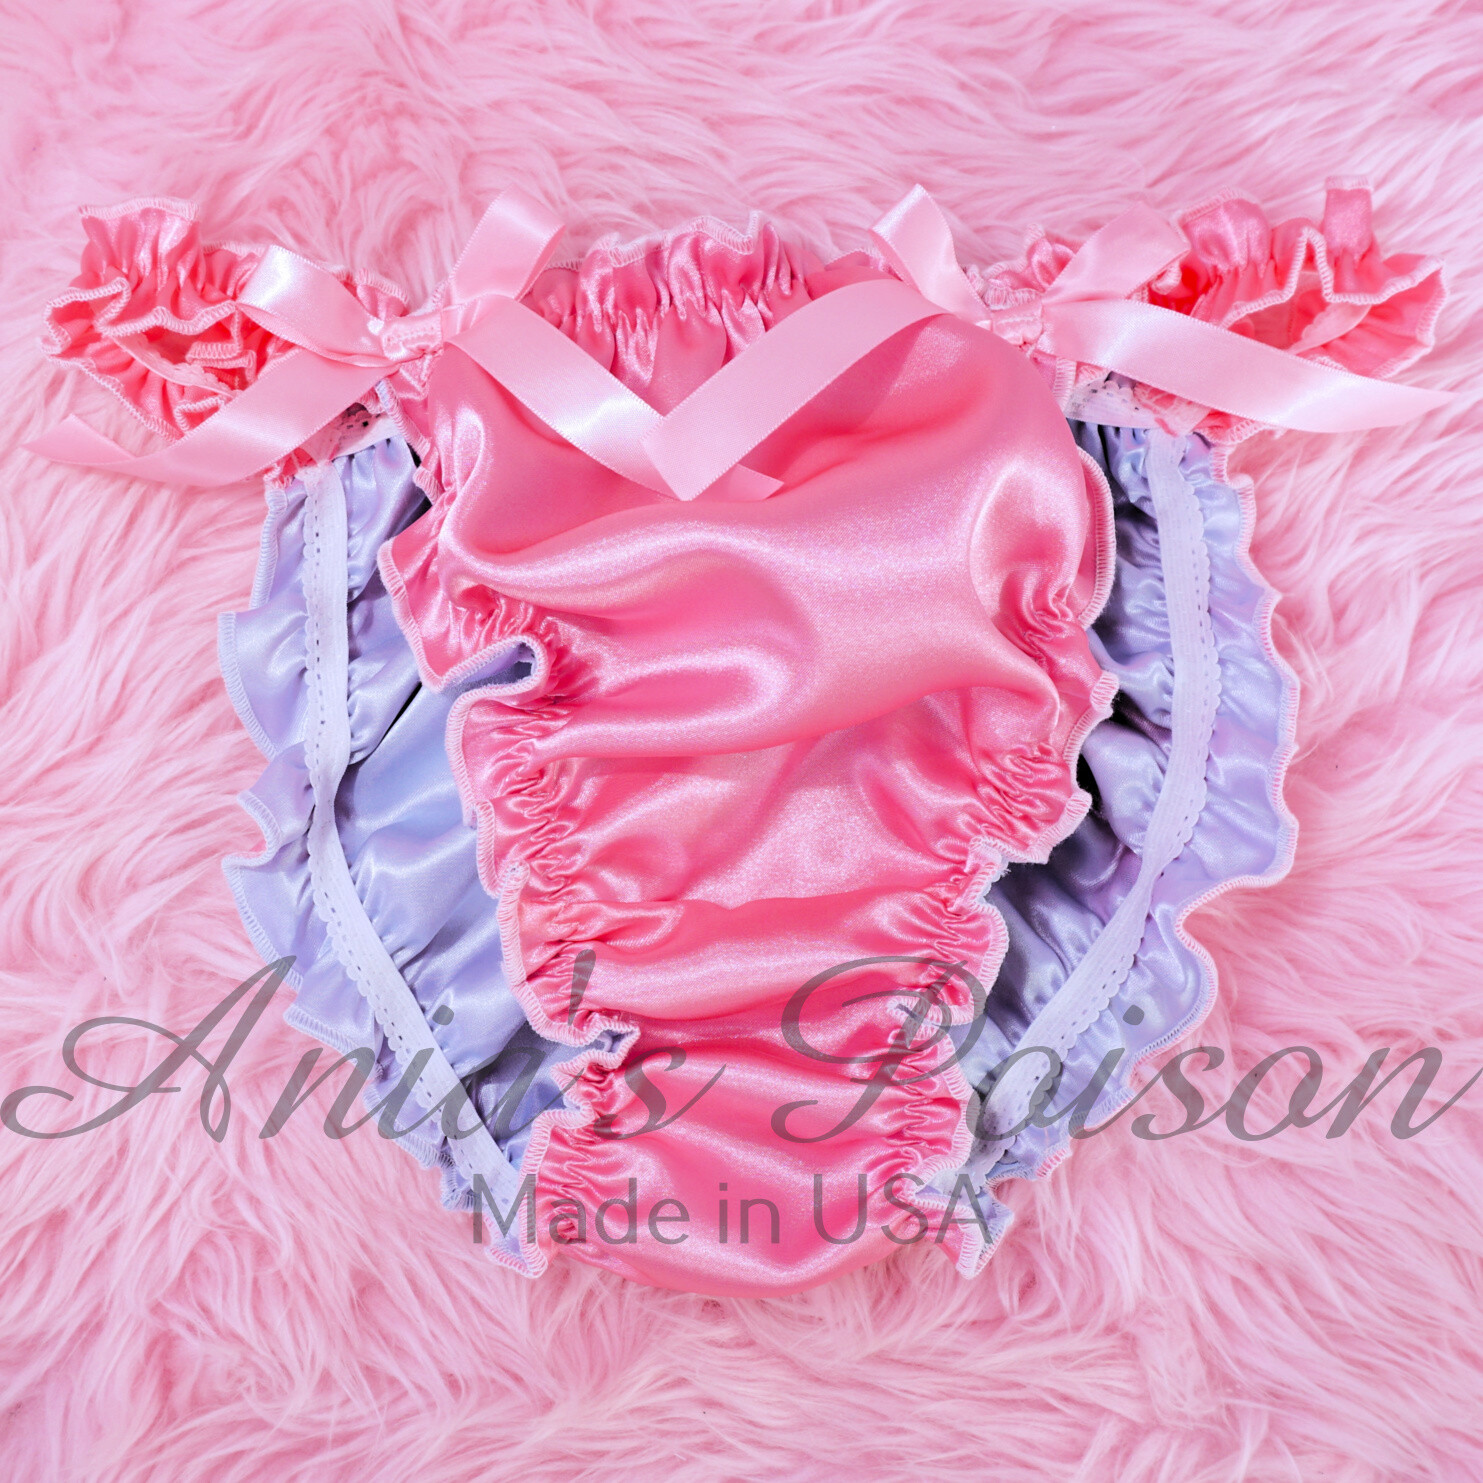 Anias Poison MANties satin shiny MENS sissy ruffled double lined matching side panties-